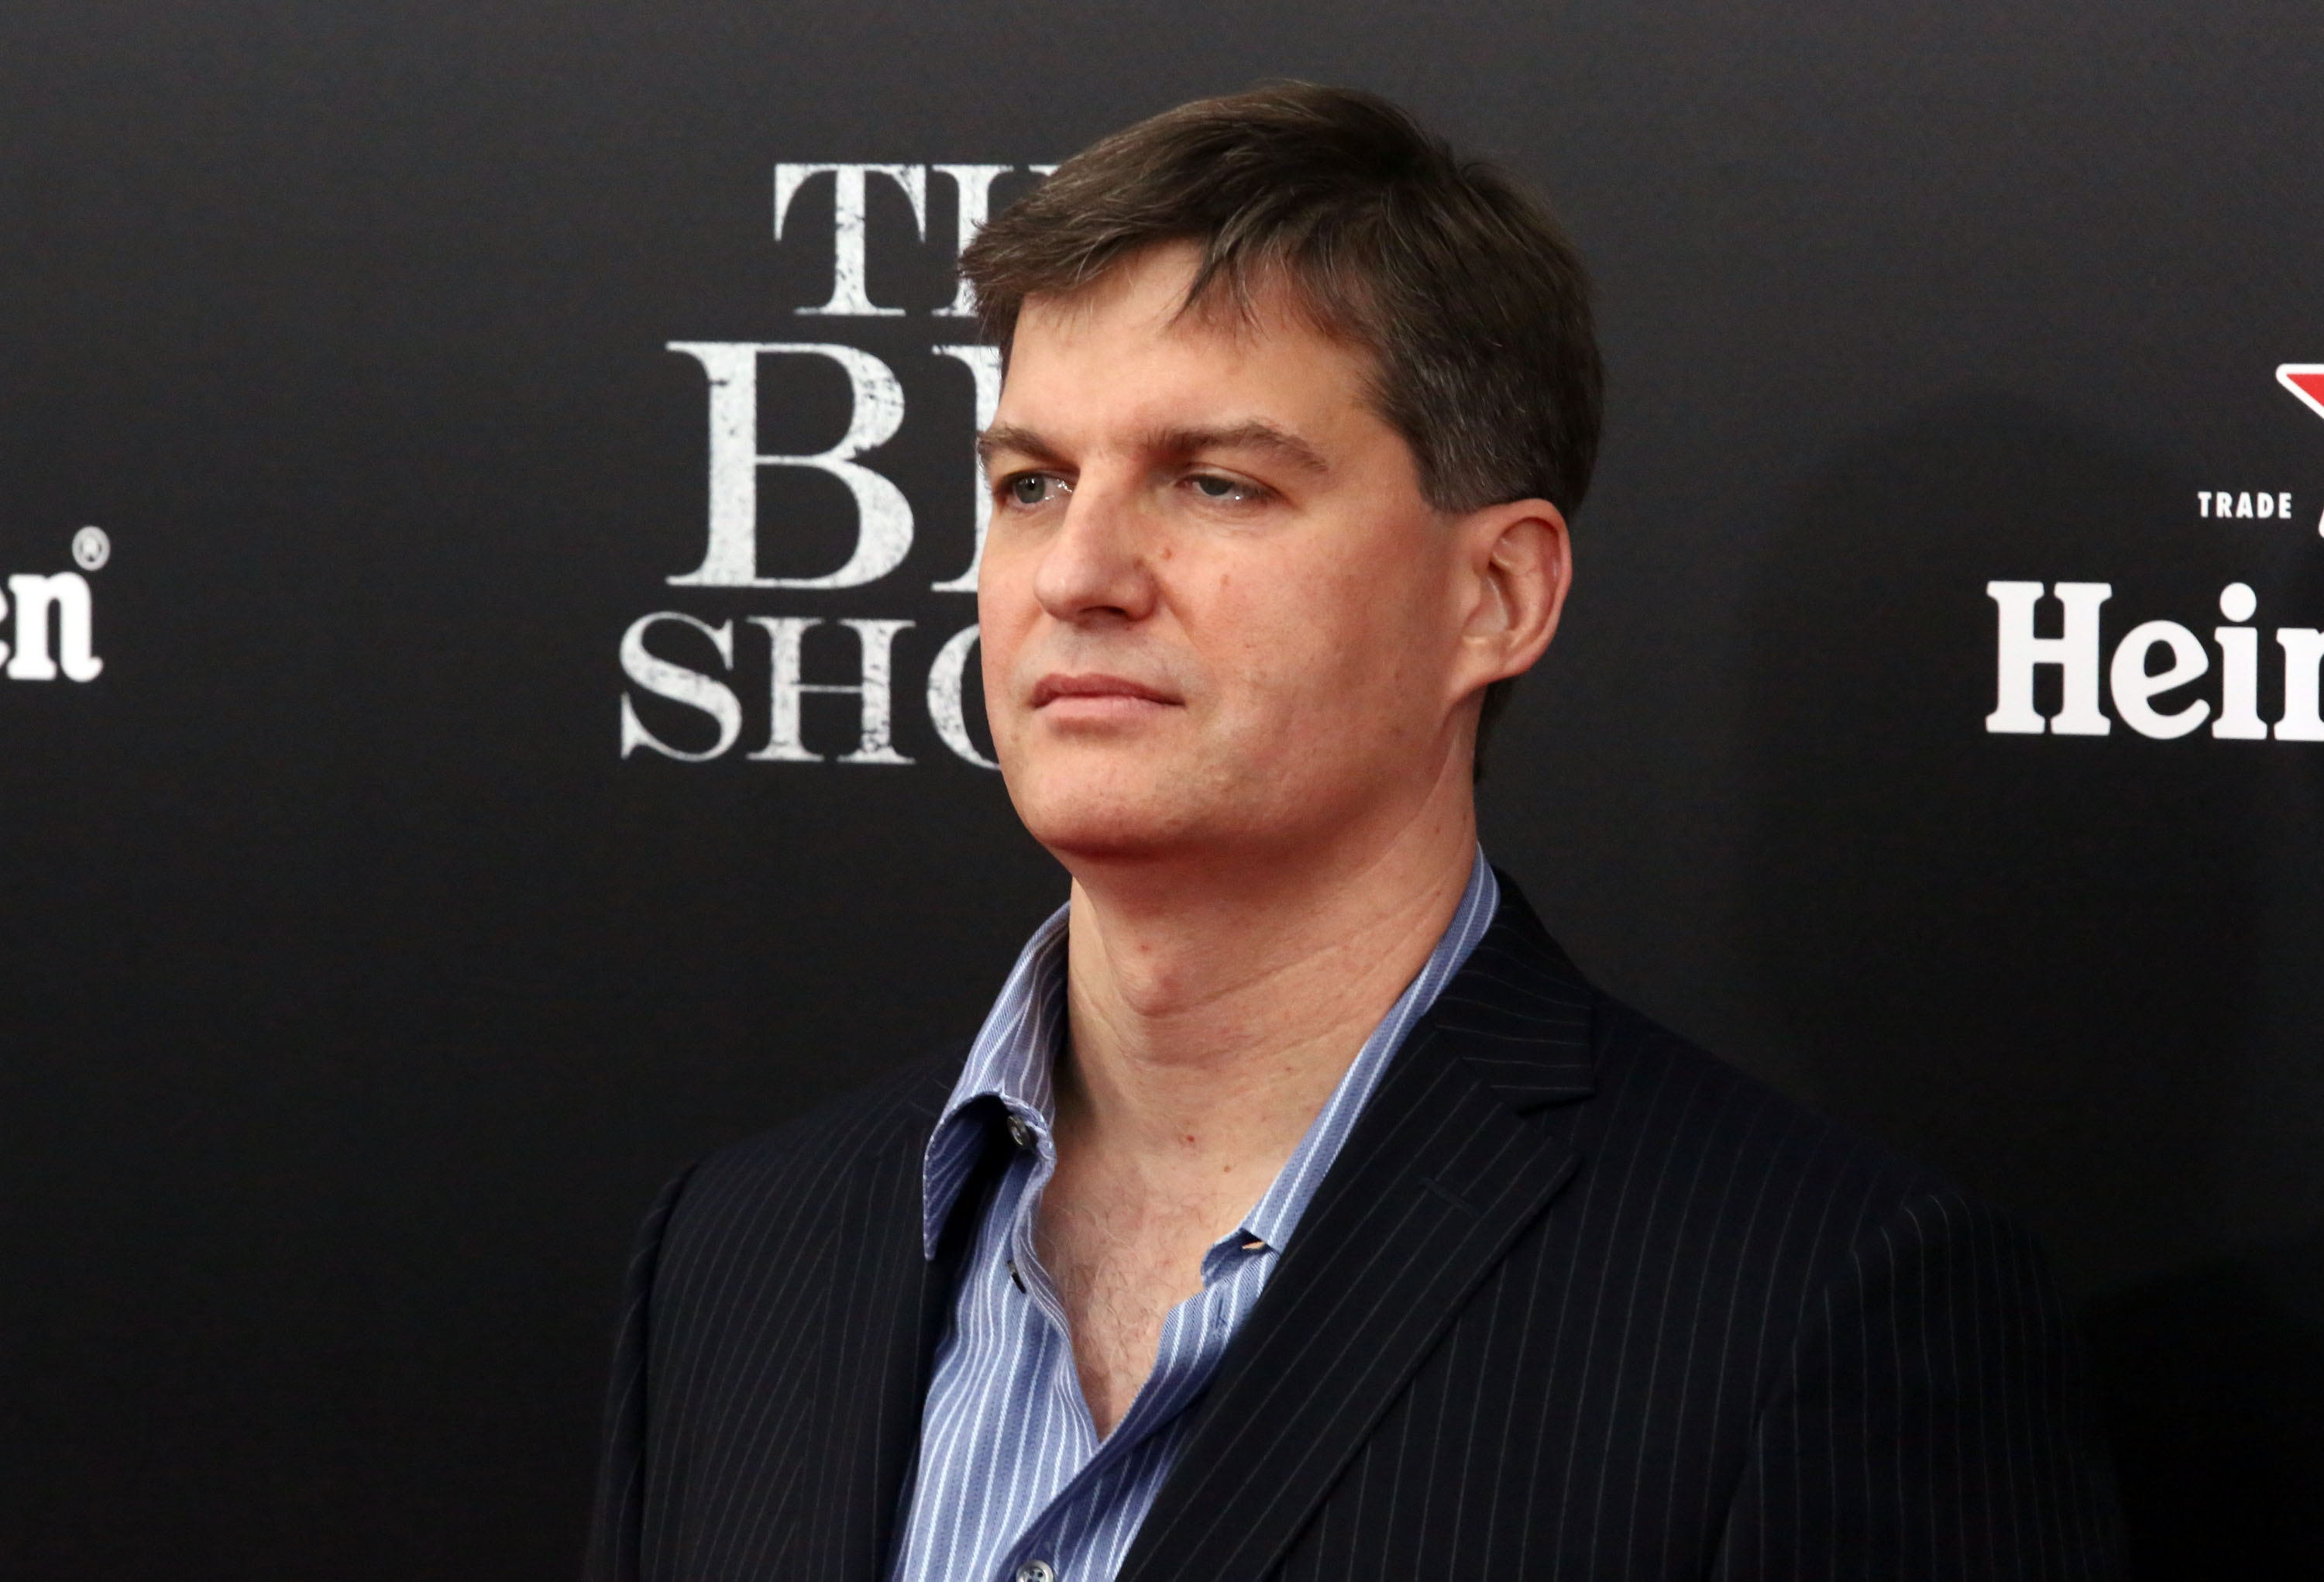 Michael Burry Announced He is in a Sales Position at Tesla